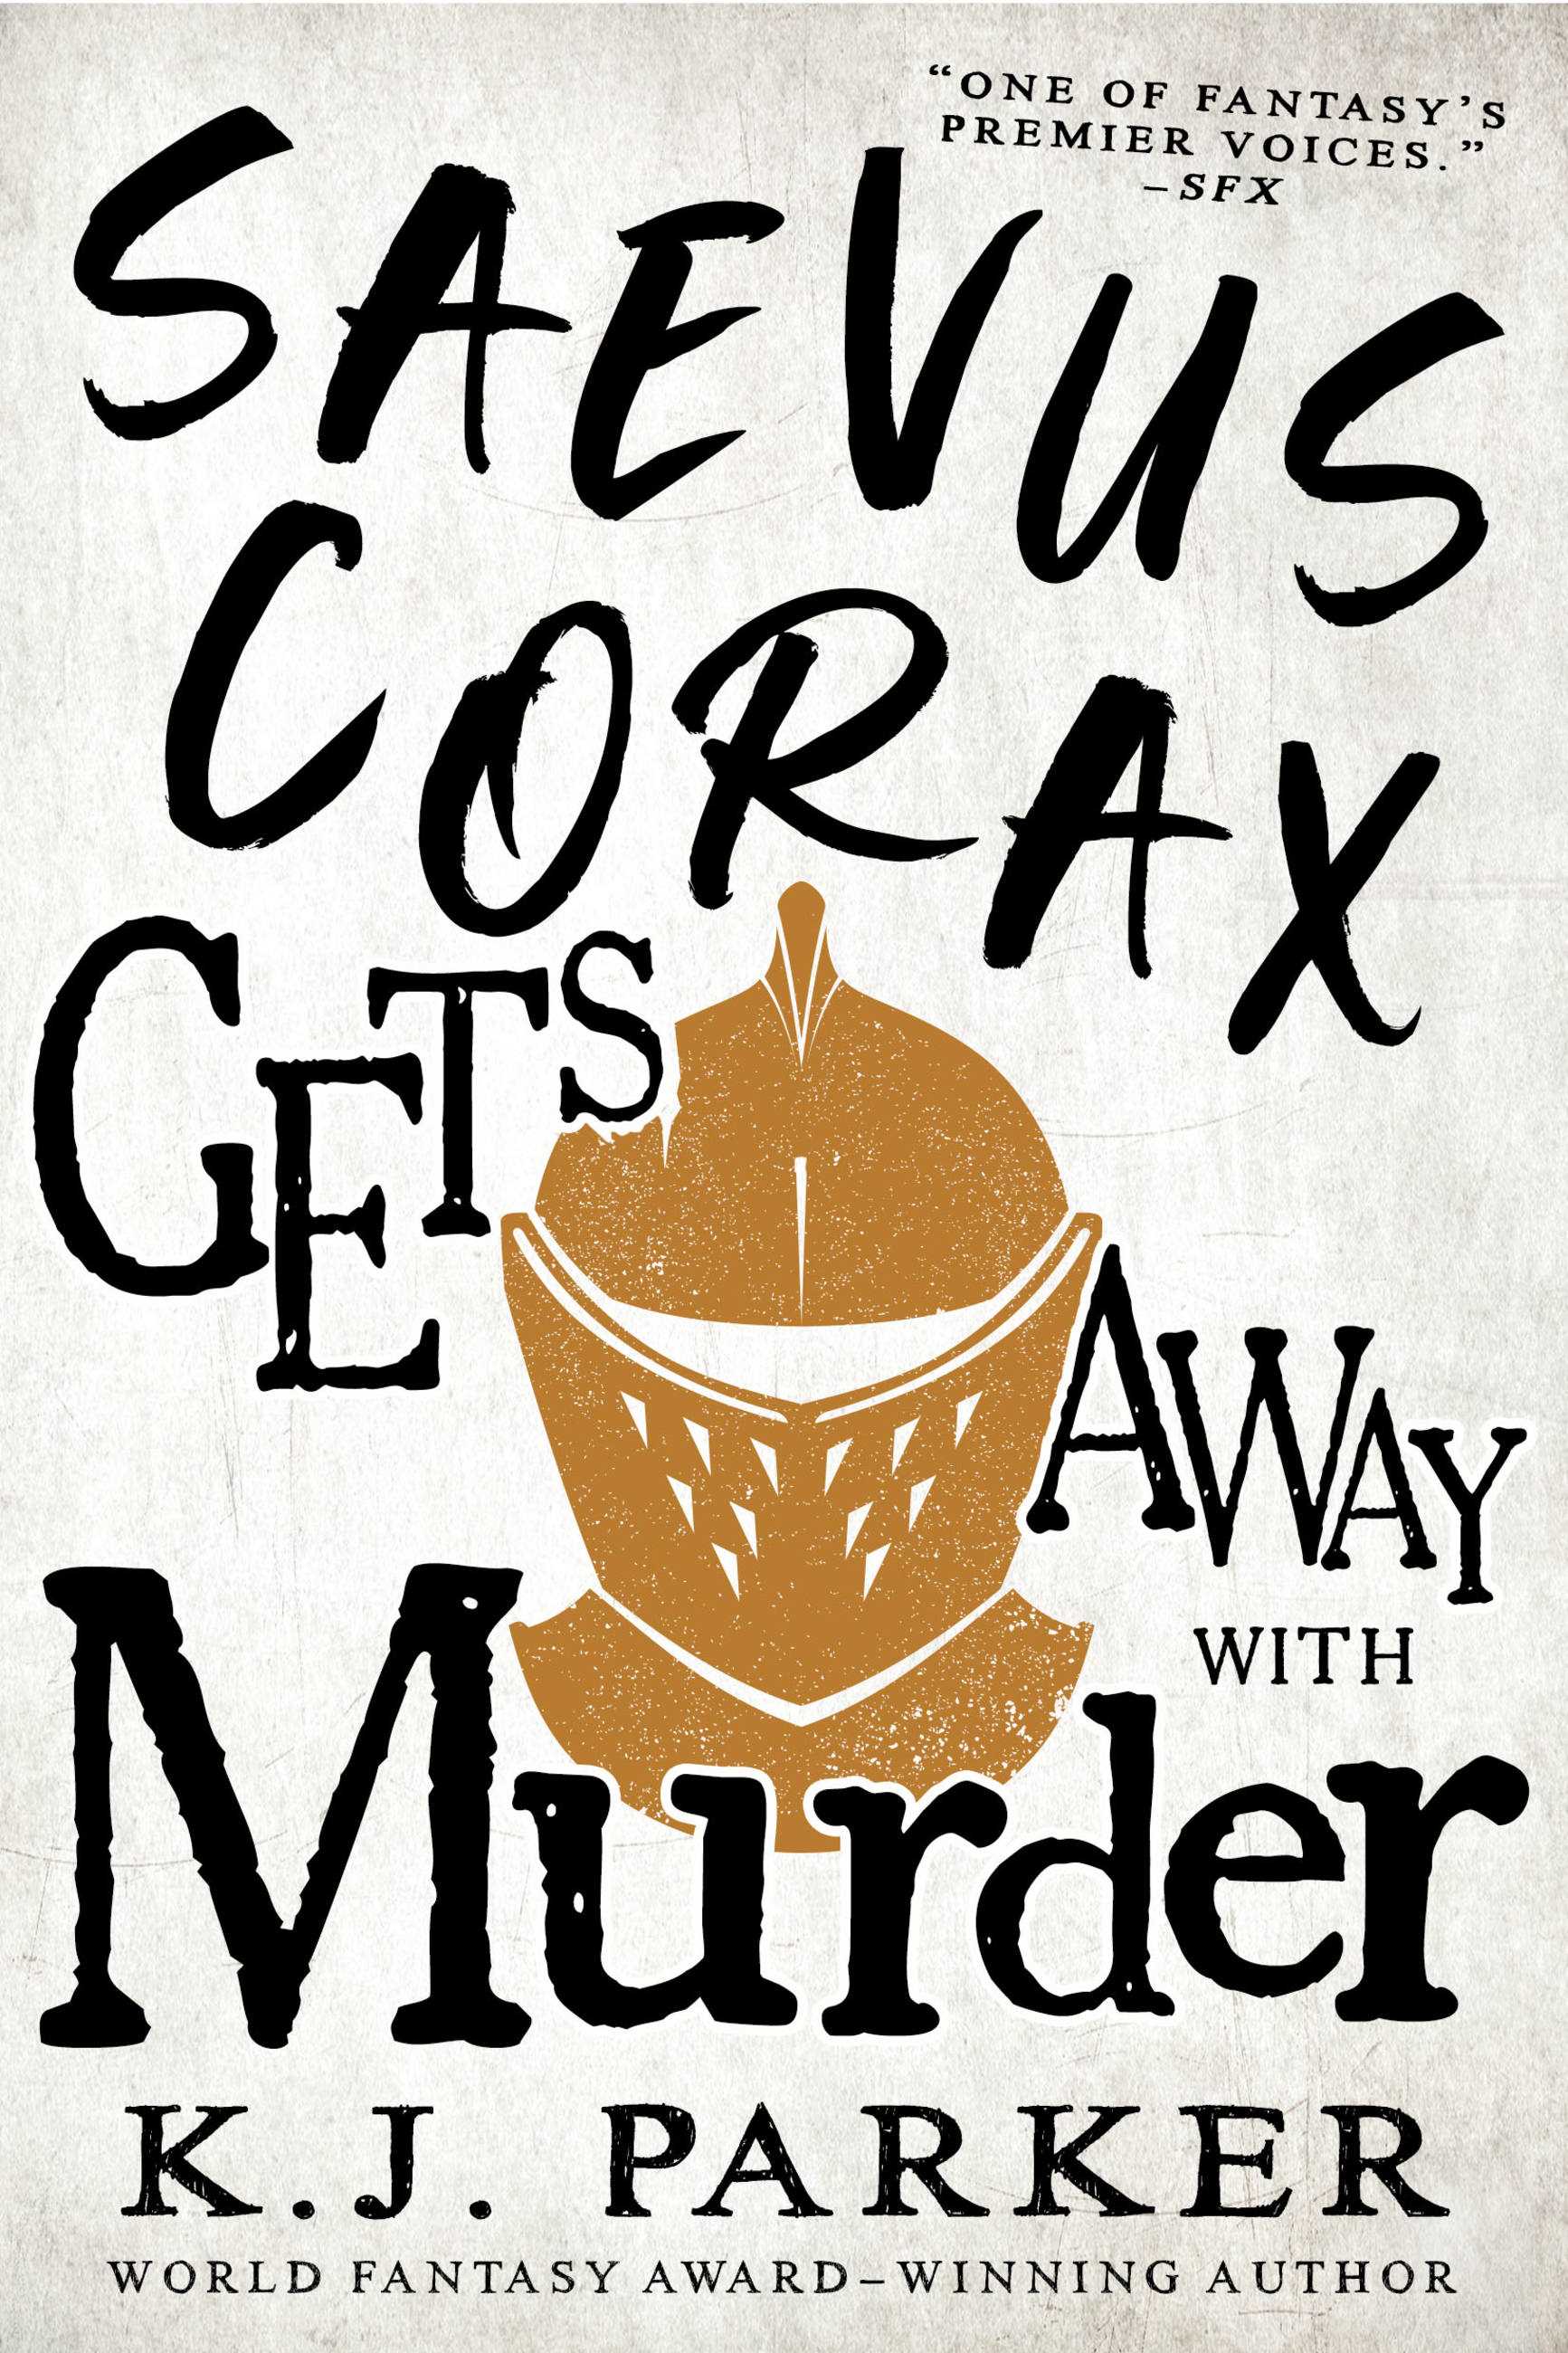 Saevus Corax Gets Away With Murder (Book #03)